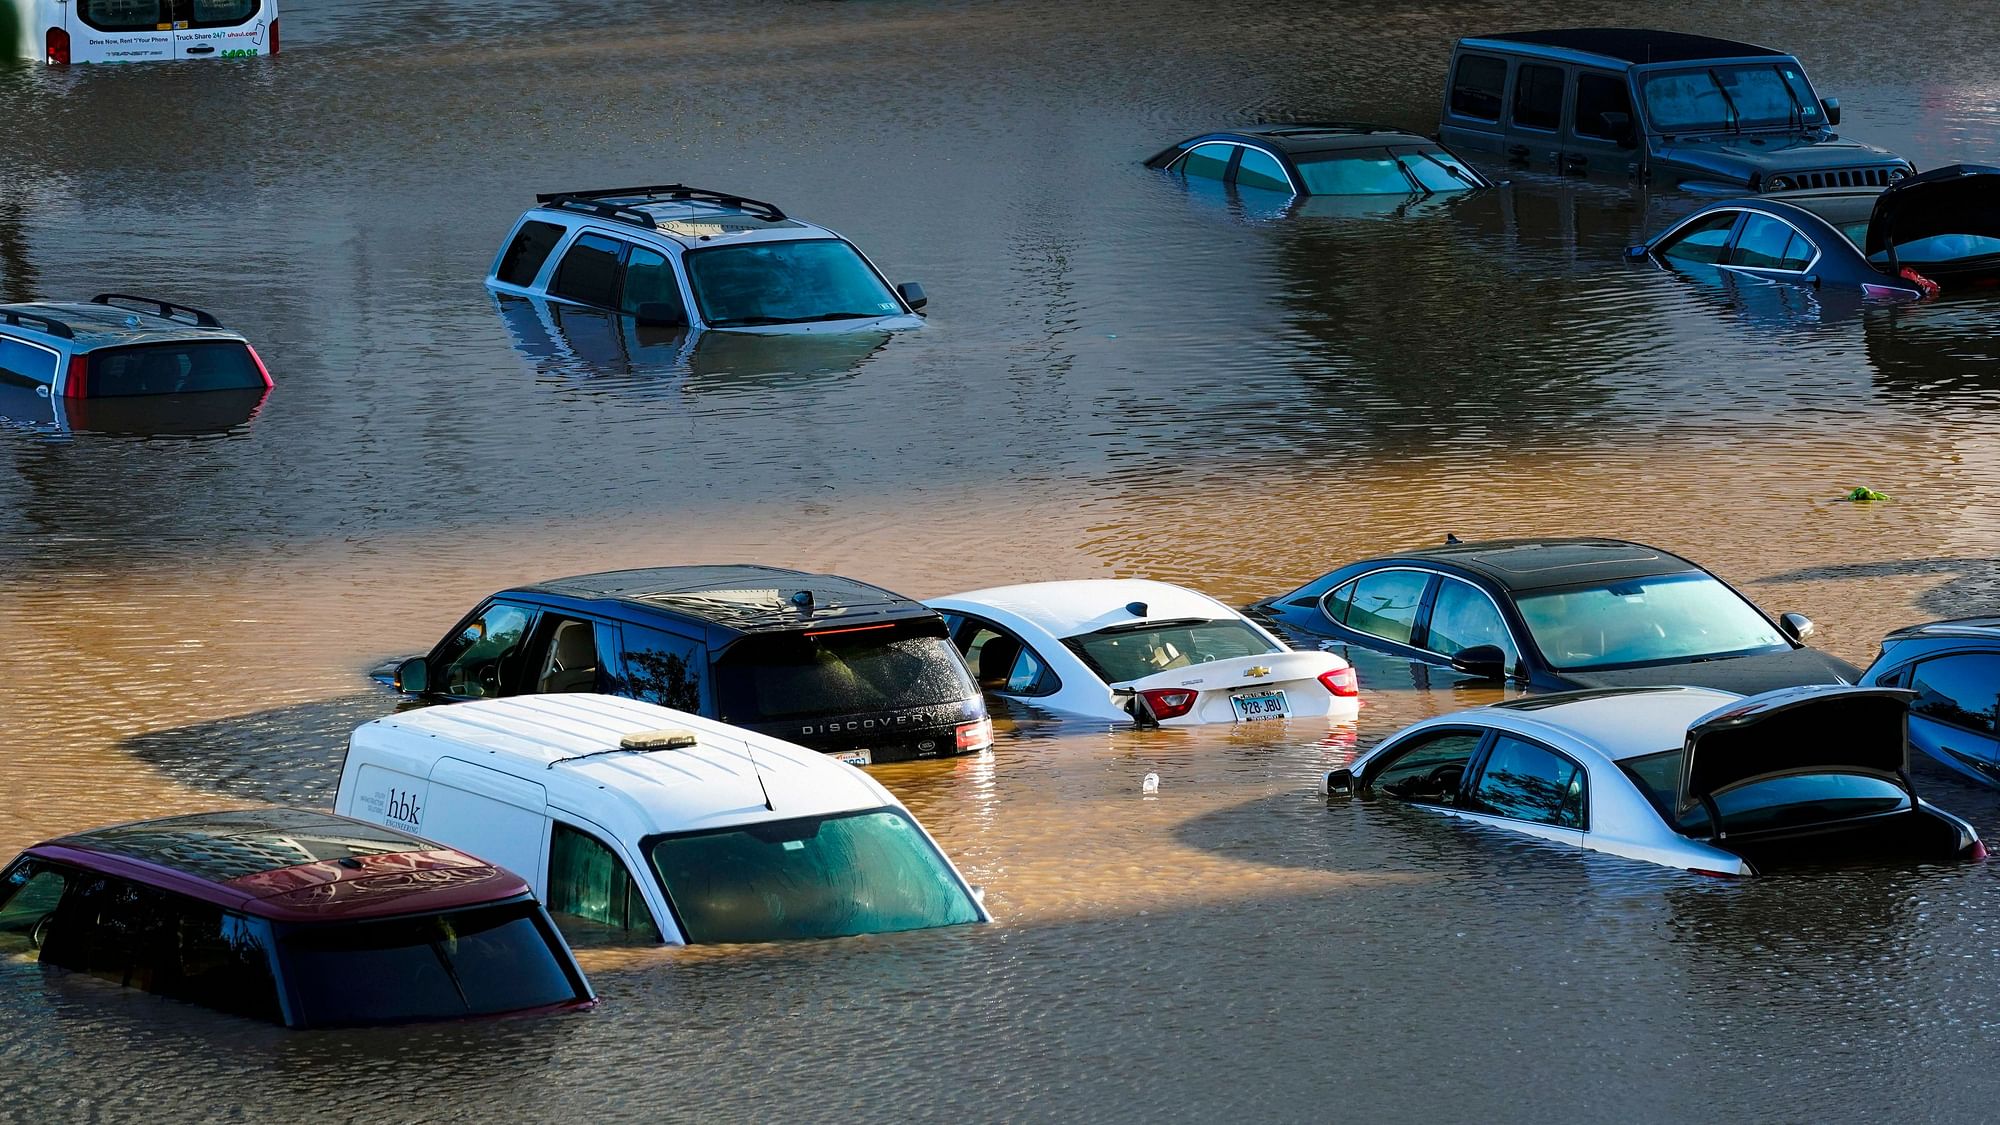 <div class="paragraphs"><p>Philadelphia: Vehicles are under water during flooding on 2 September in the aftermath of downpours and high winds from the remnants of Hurricane Ida that hit the area.</p></div>